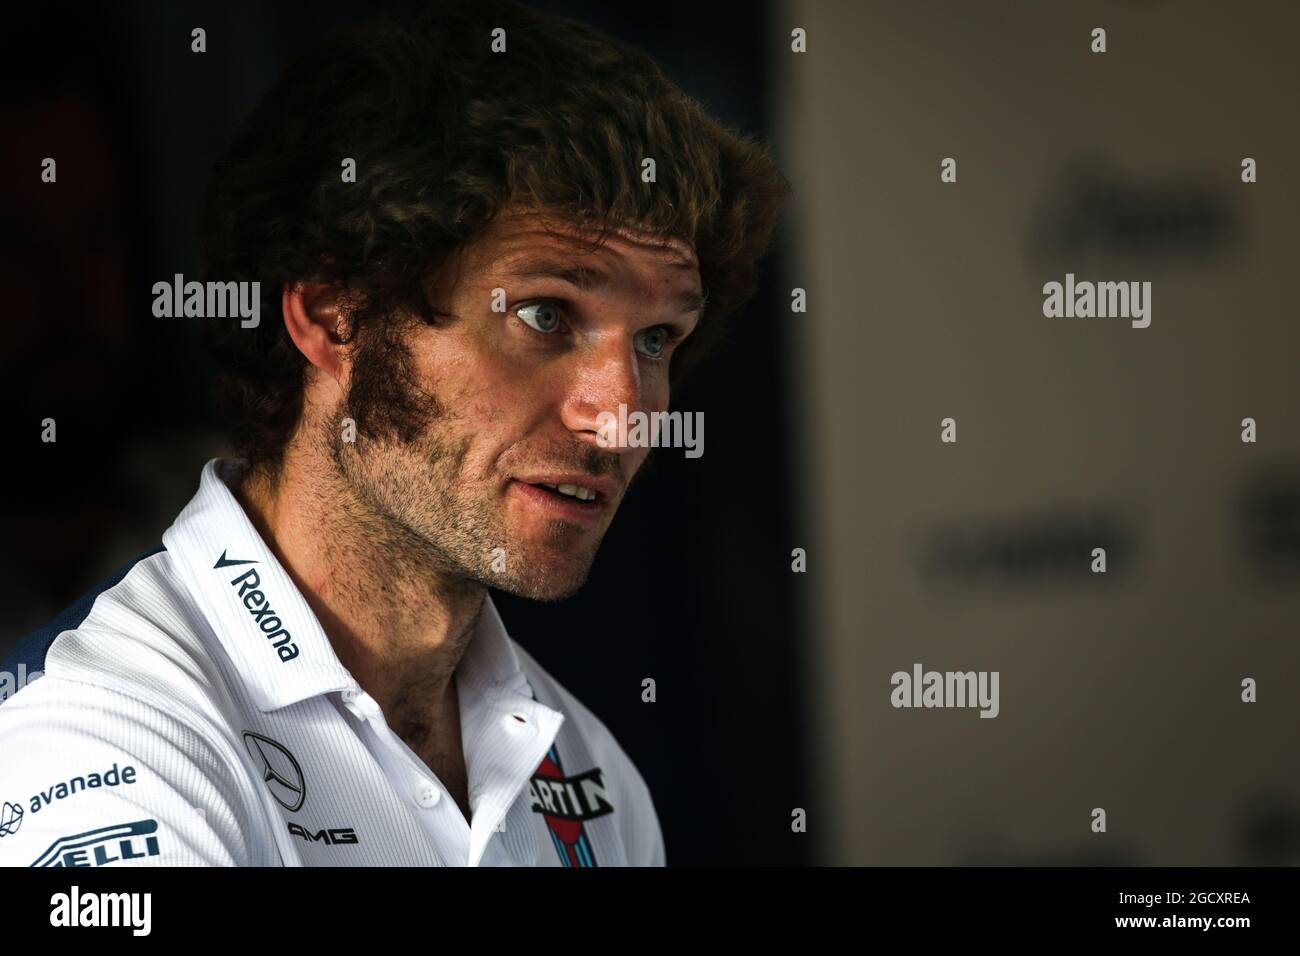 Guy Martin (GBR) Motorcycle Racer and TV Personality with the Williams team. Belgian Grand Prix, Friday 25th August 2017. Spa-Francorchamps, Belgium. Stock Photo